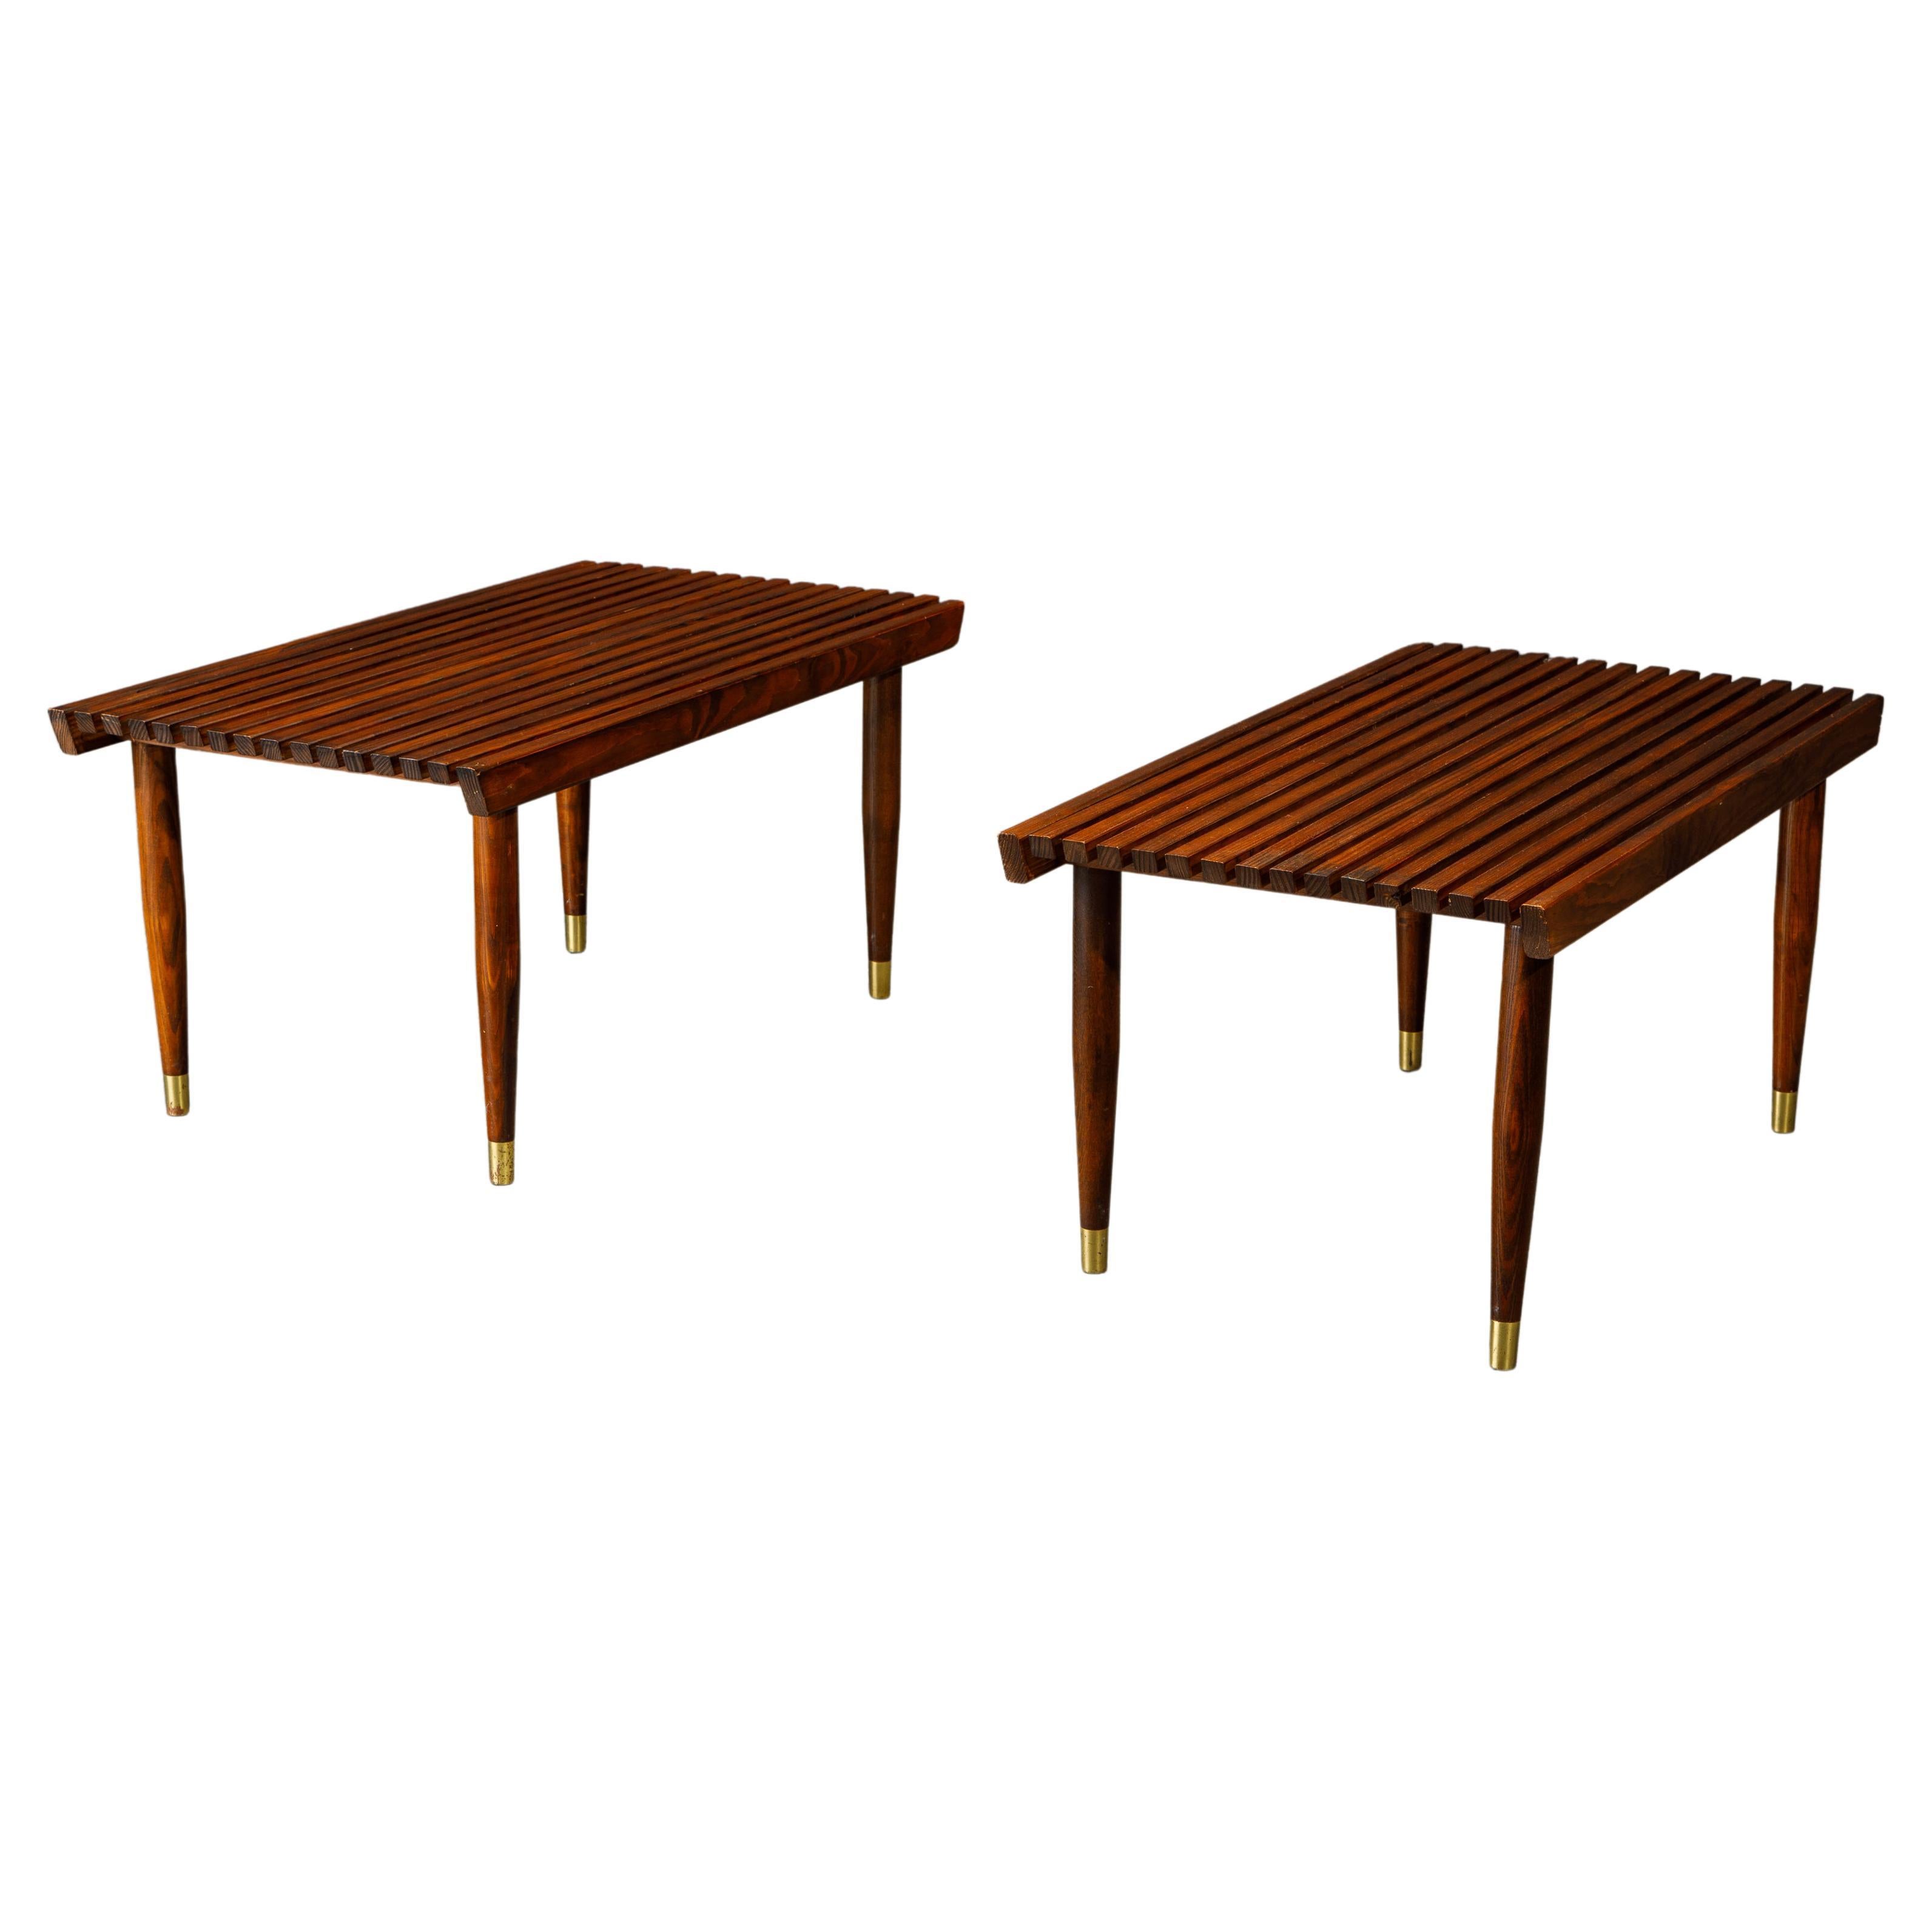 Pair of Refinished George Nelson Style Slatted Wood Benches or Tables, c. 1960